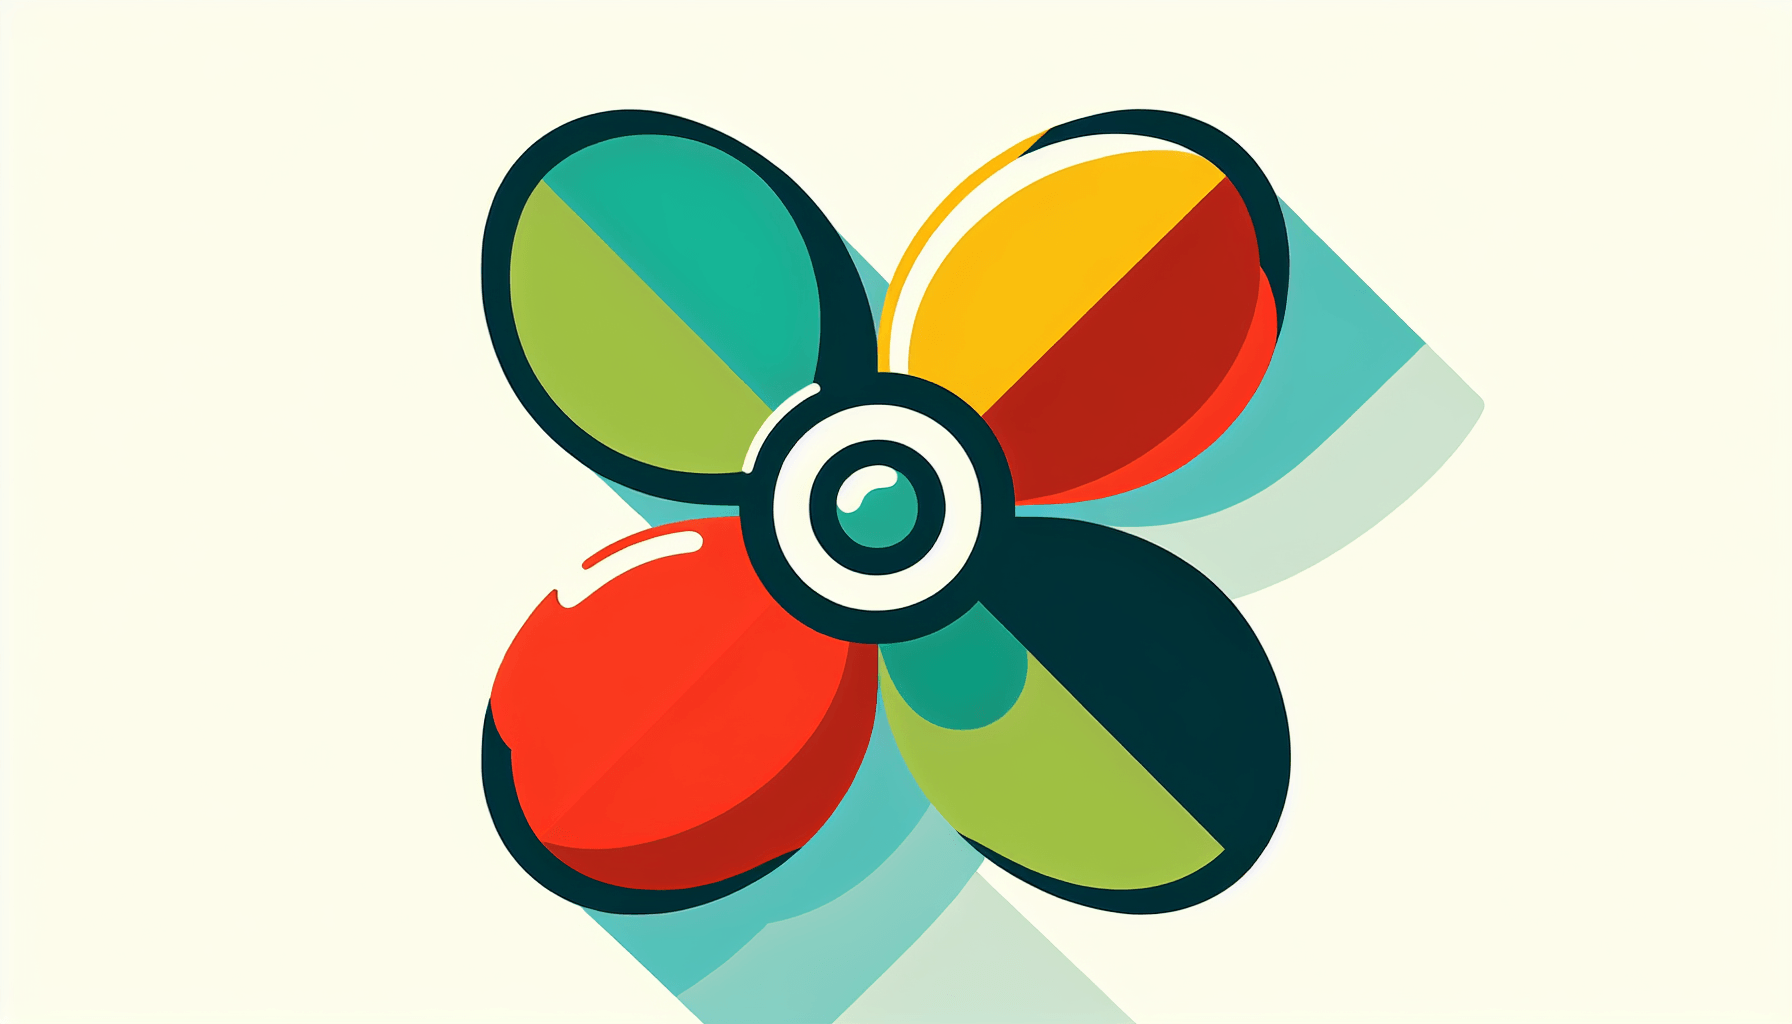 Propeller in flat illustration style and white background, red #f47574, green #88c7a8, yellow #fcc44b, and blue #645bc8 colors.